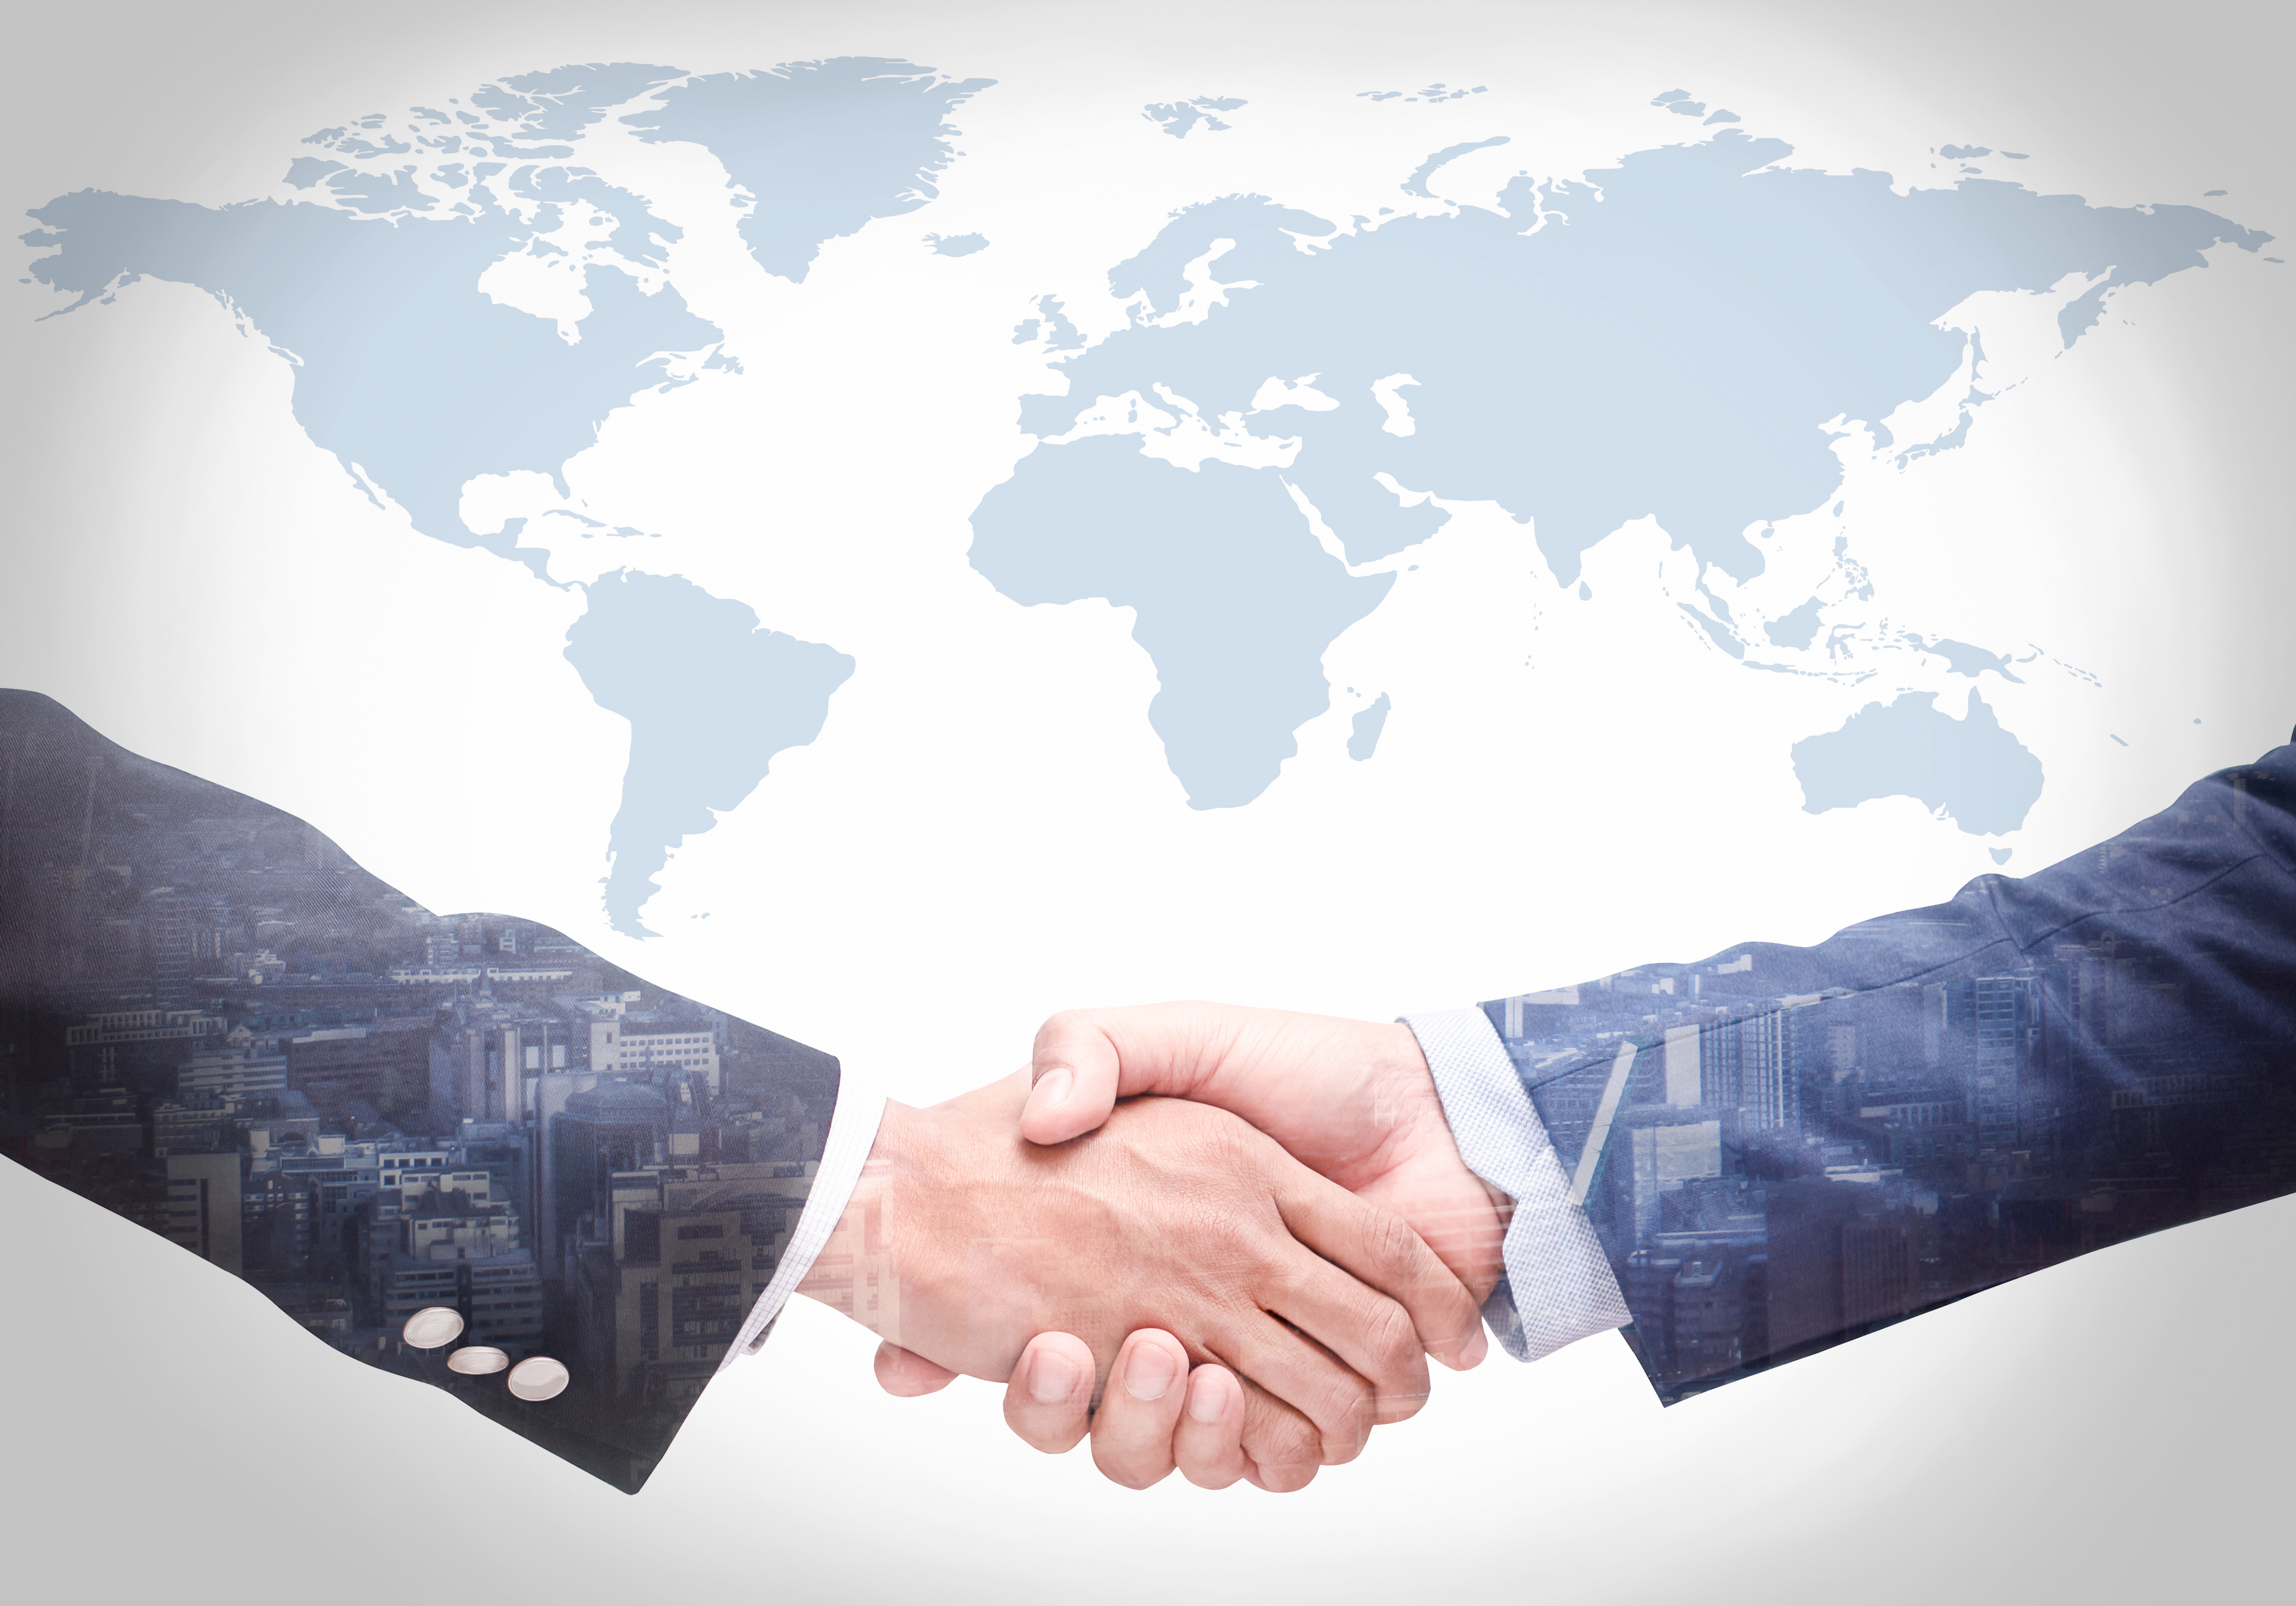 Two hands shaking in front of a world map with a city skyline imposed over the handshake.